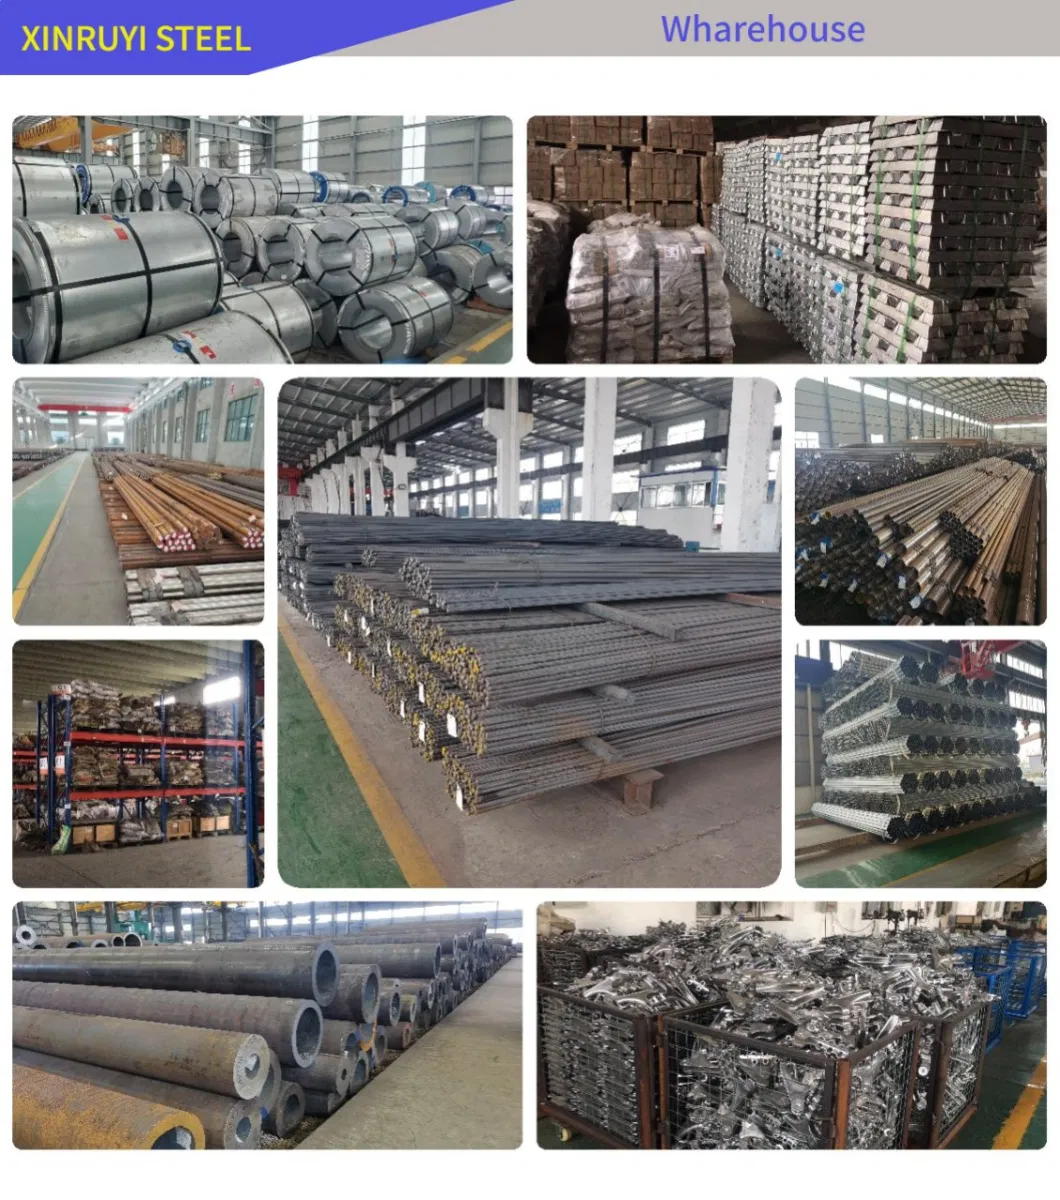 2 Hot Rolled Round Seamless Steel Pipe Big Diameter Mechanical Tube for Hydraulic Jack